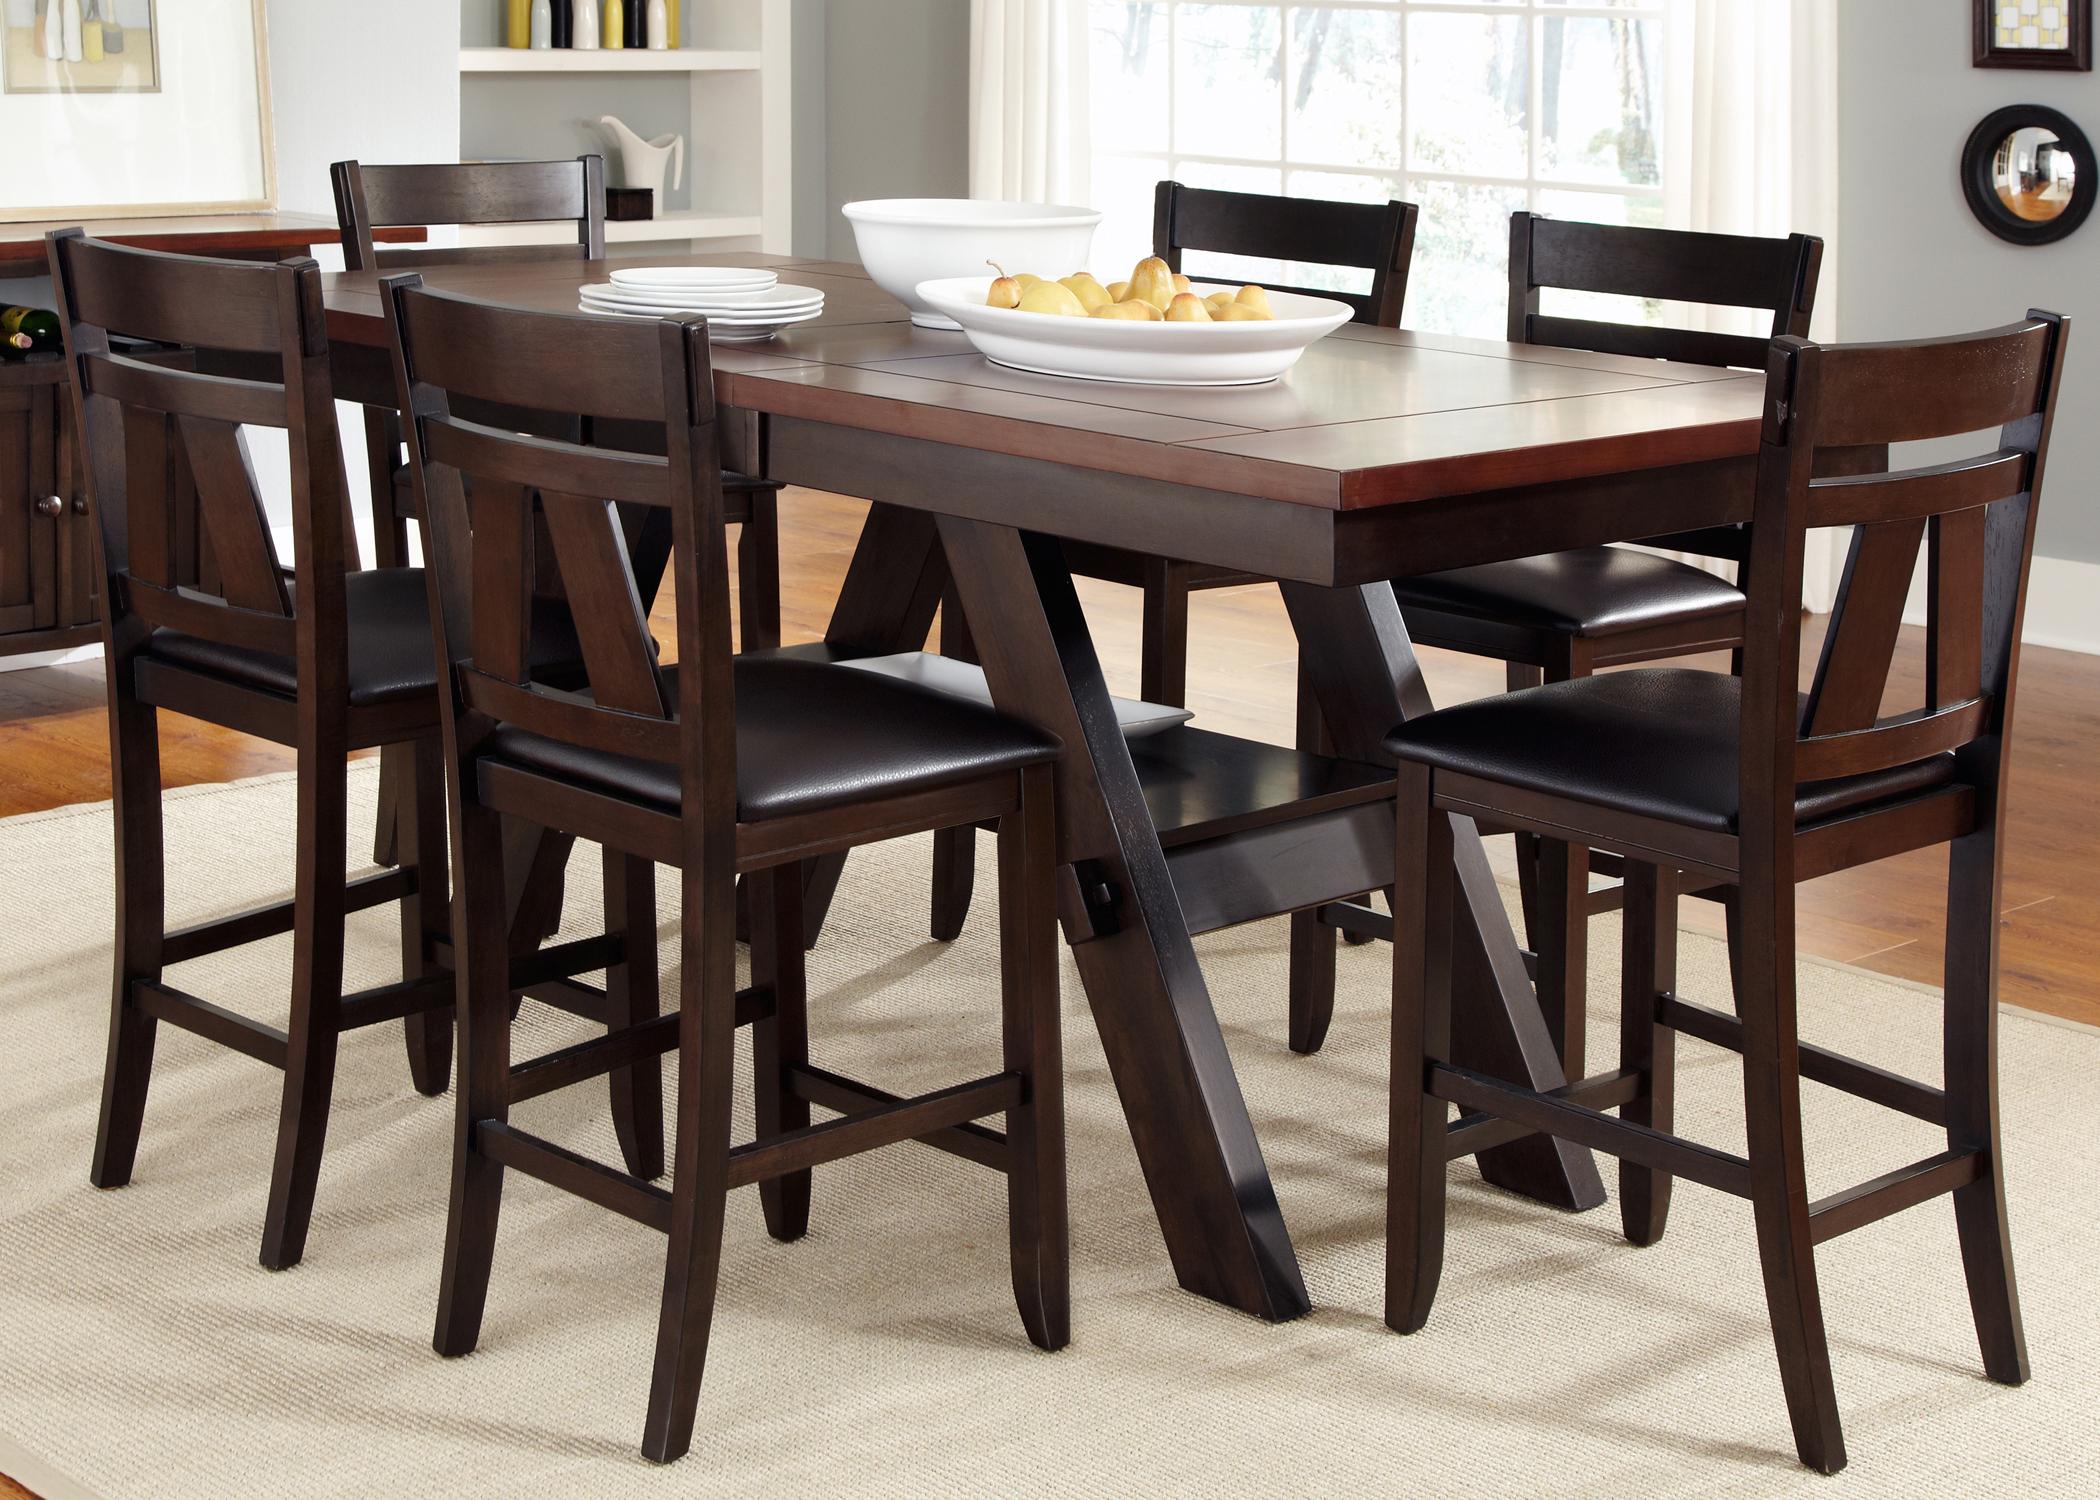 7 Piece Trestle Gathering Table with Counter Height Chairs Set